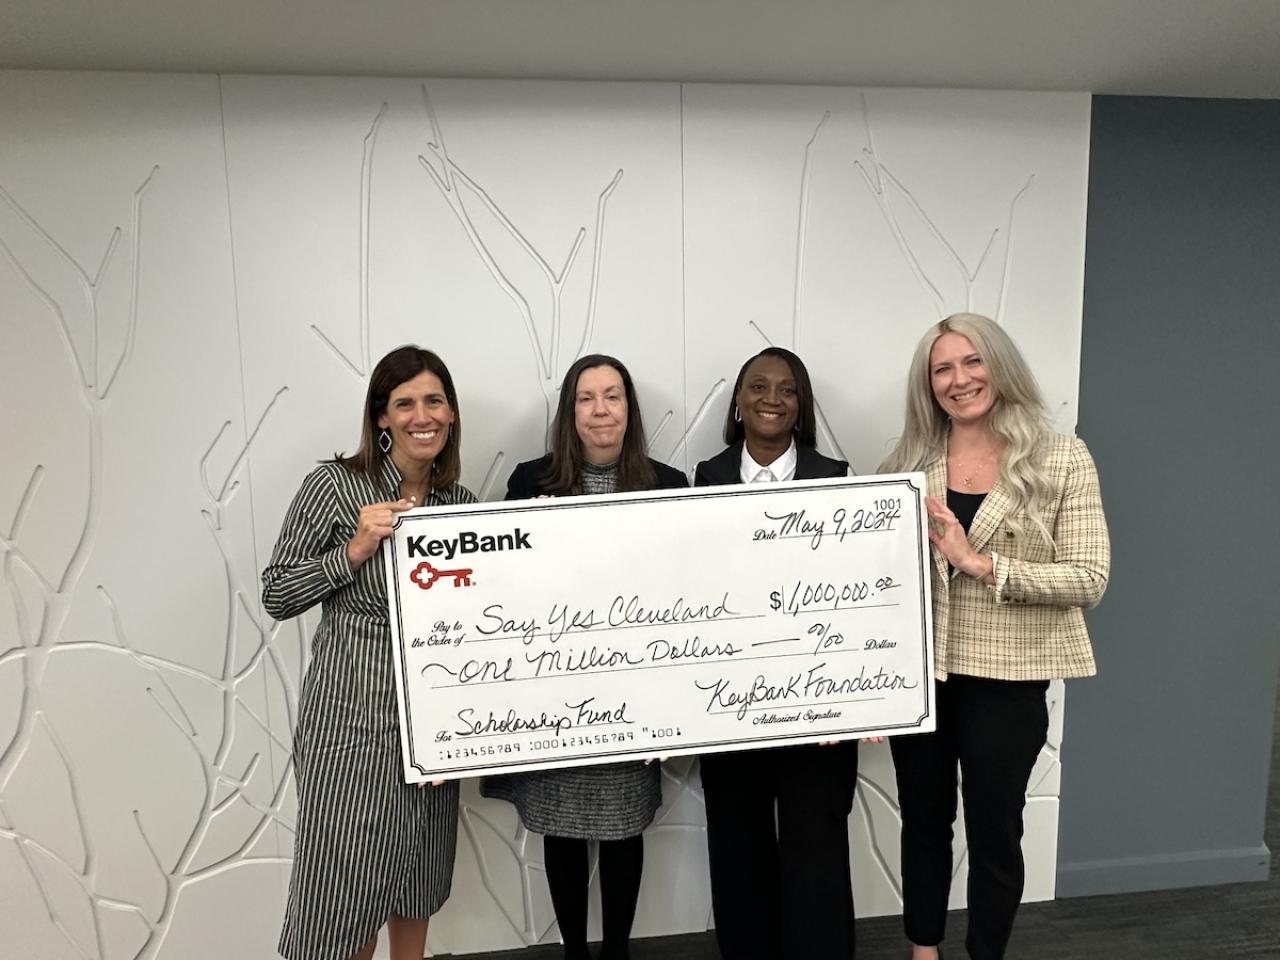 Photo (L-R): KeyBank Cleveland Market President Kelly Lamirand, Say Yes Cleveland Executive Director Diane Downing, KeyBank Cleveland Corporate Responsibility Officer Mattie Jones-Hollowell & KeyBank Northeast Ohio Community Bank Sales Leader Jessica Best.